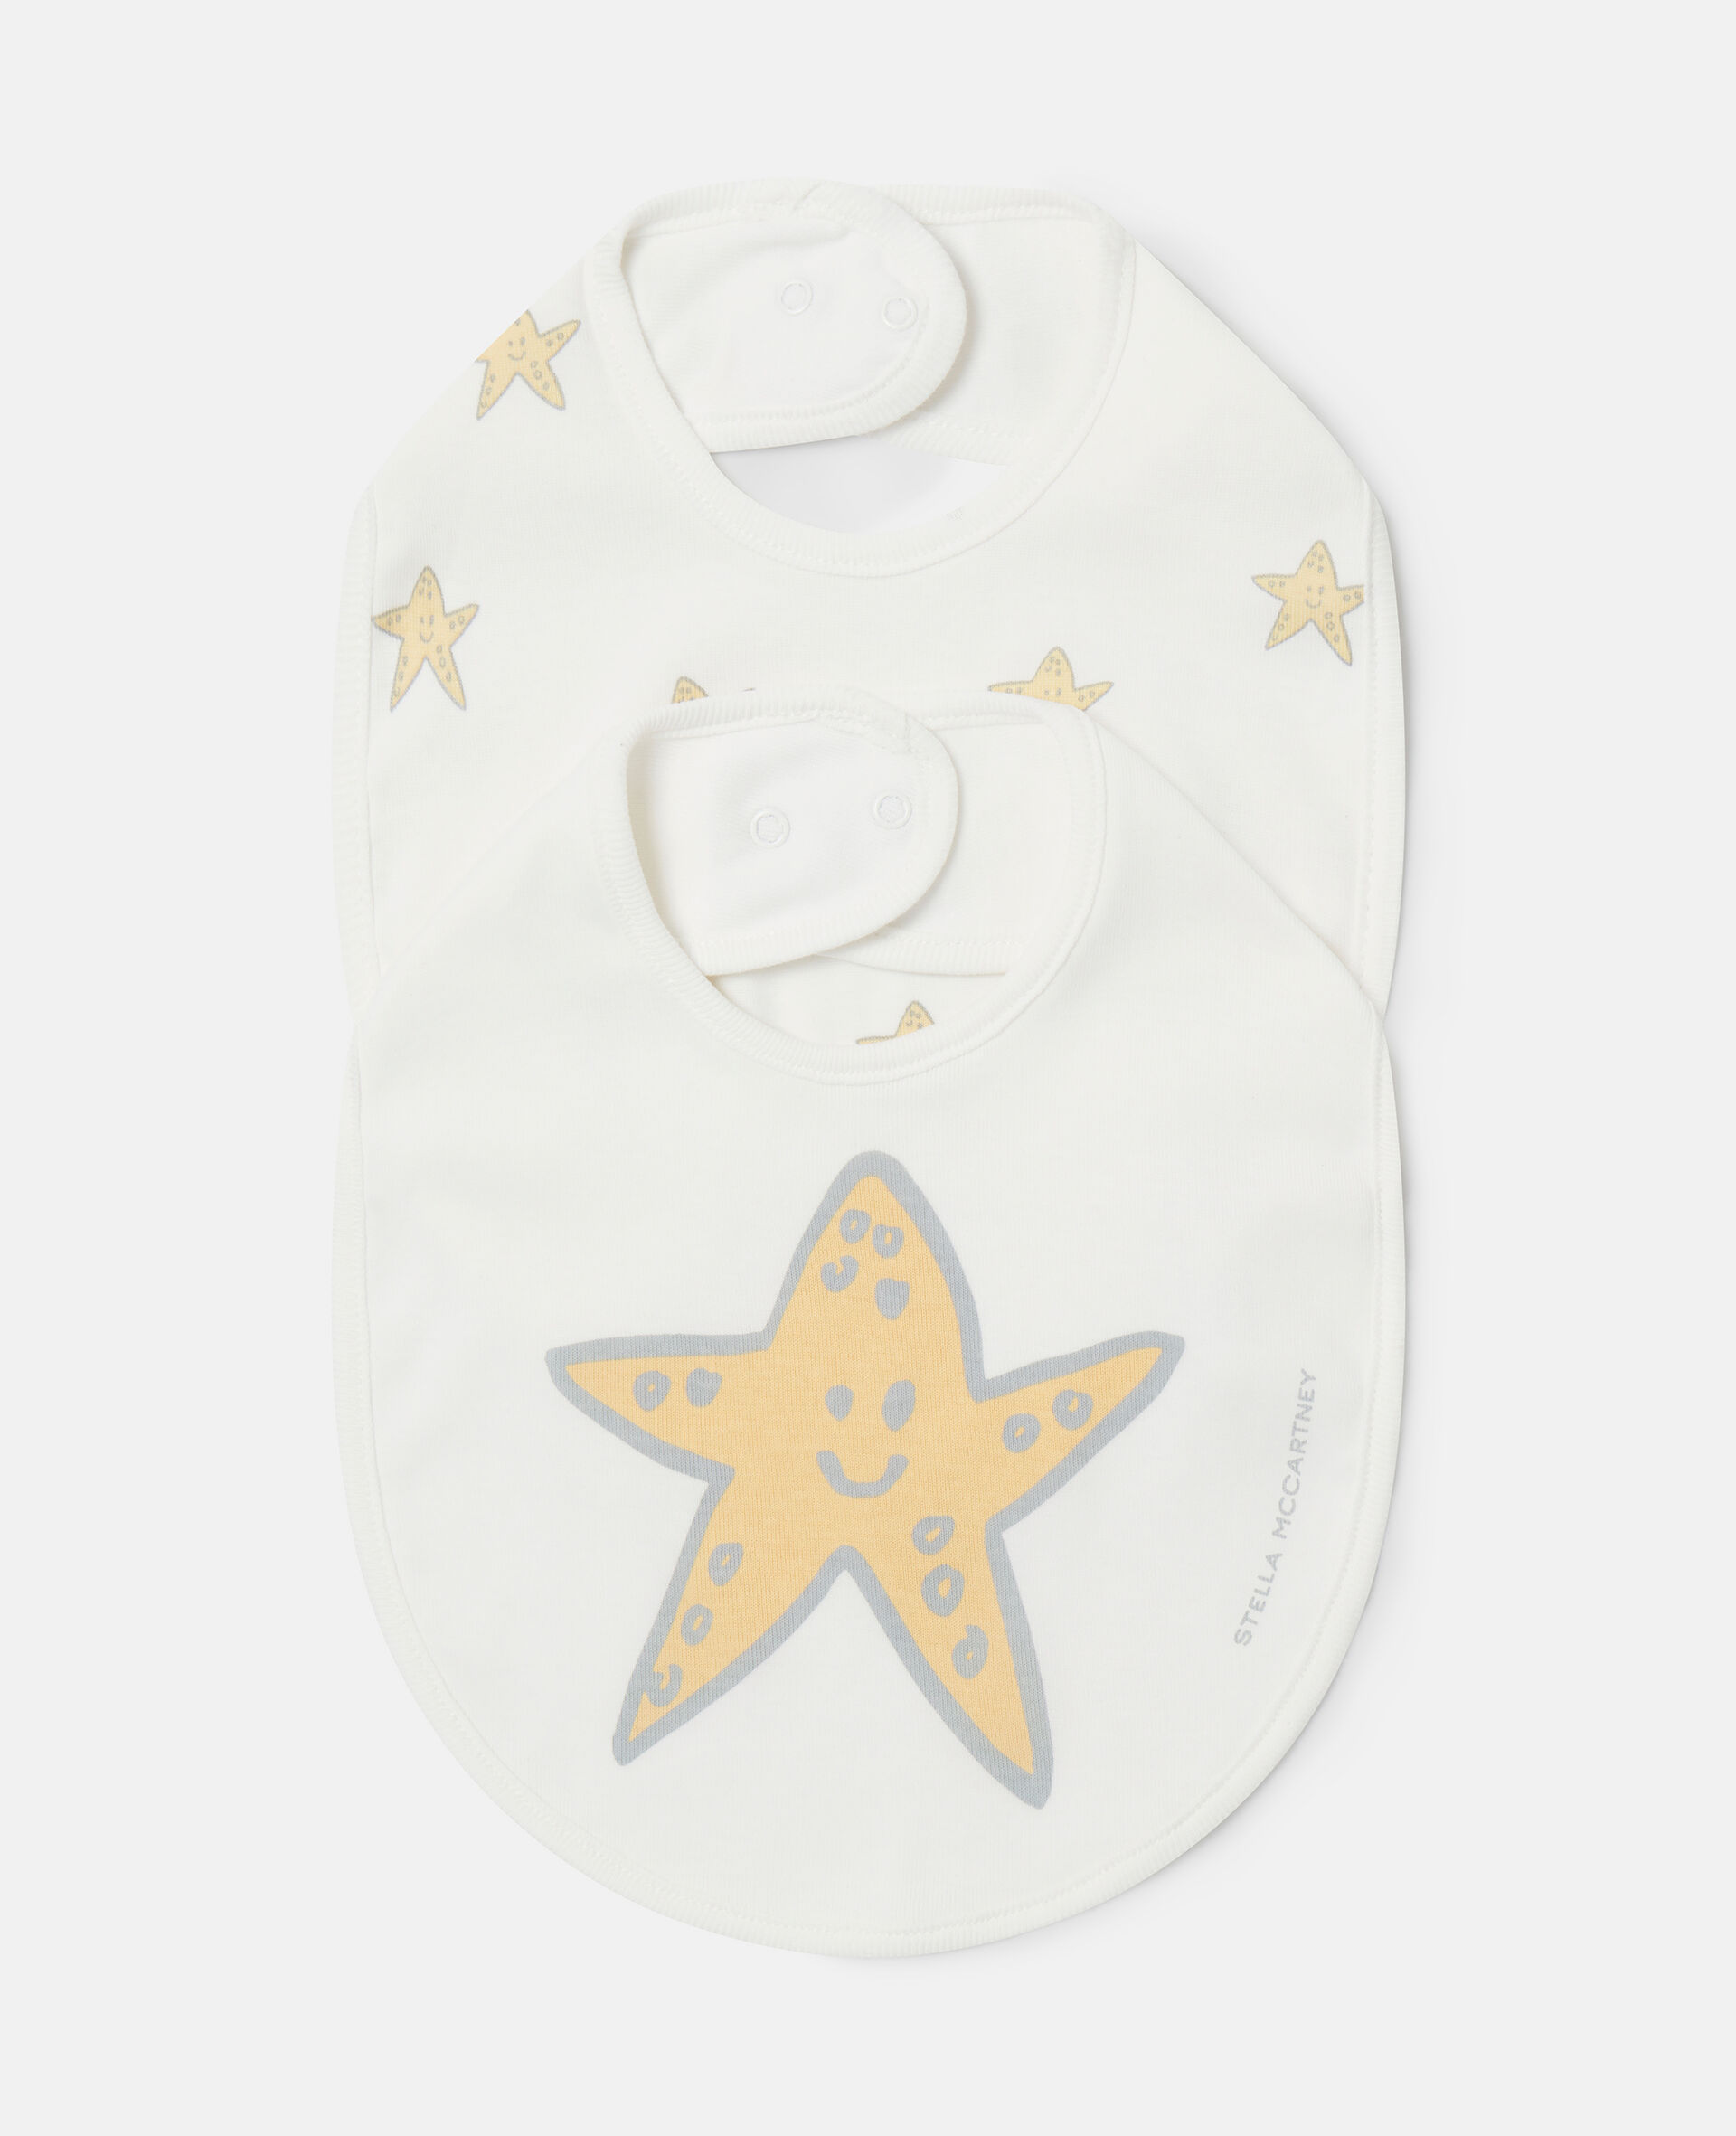 2 Pack of Smiling Stella Star Print Bibs-Multicolored-large image number 0